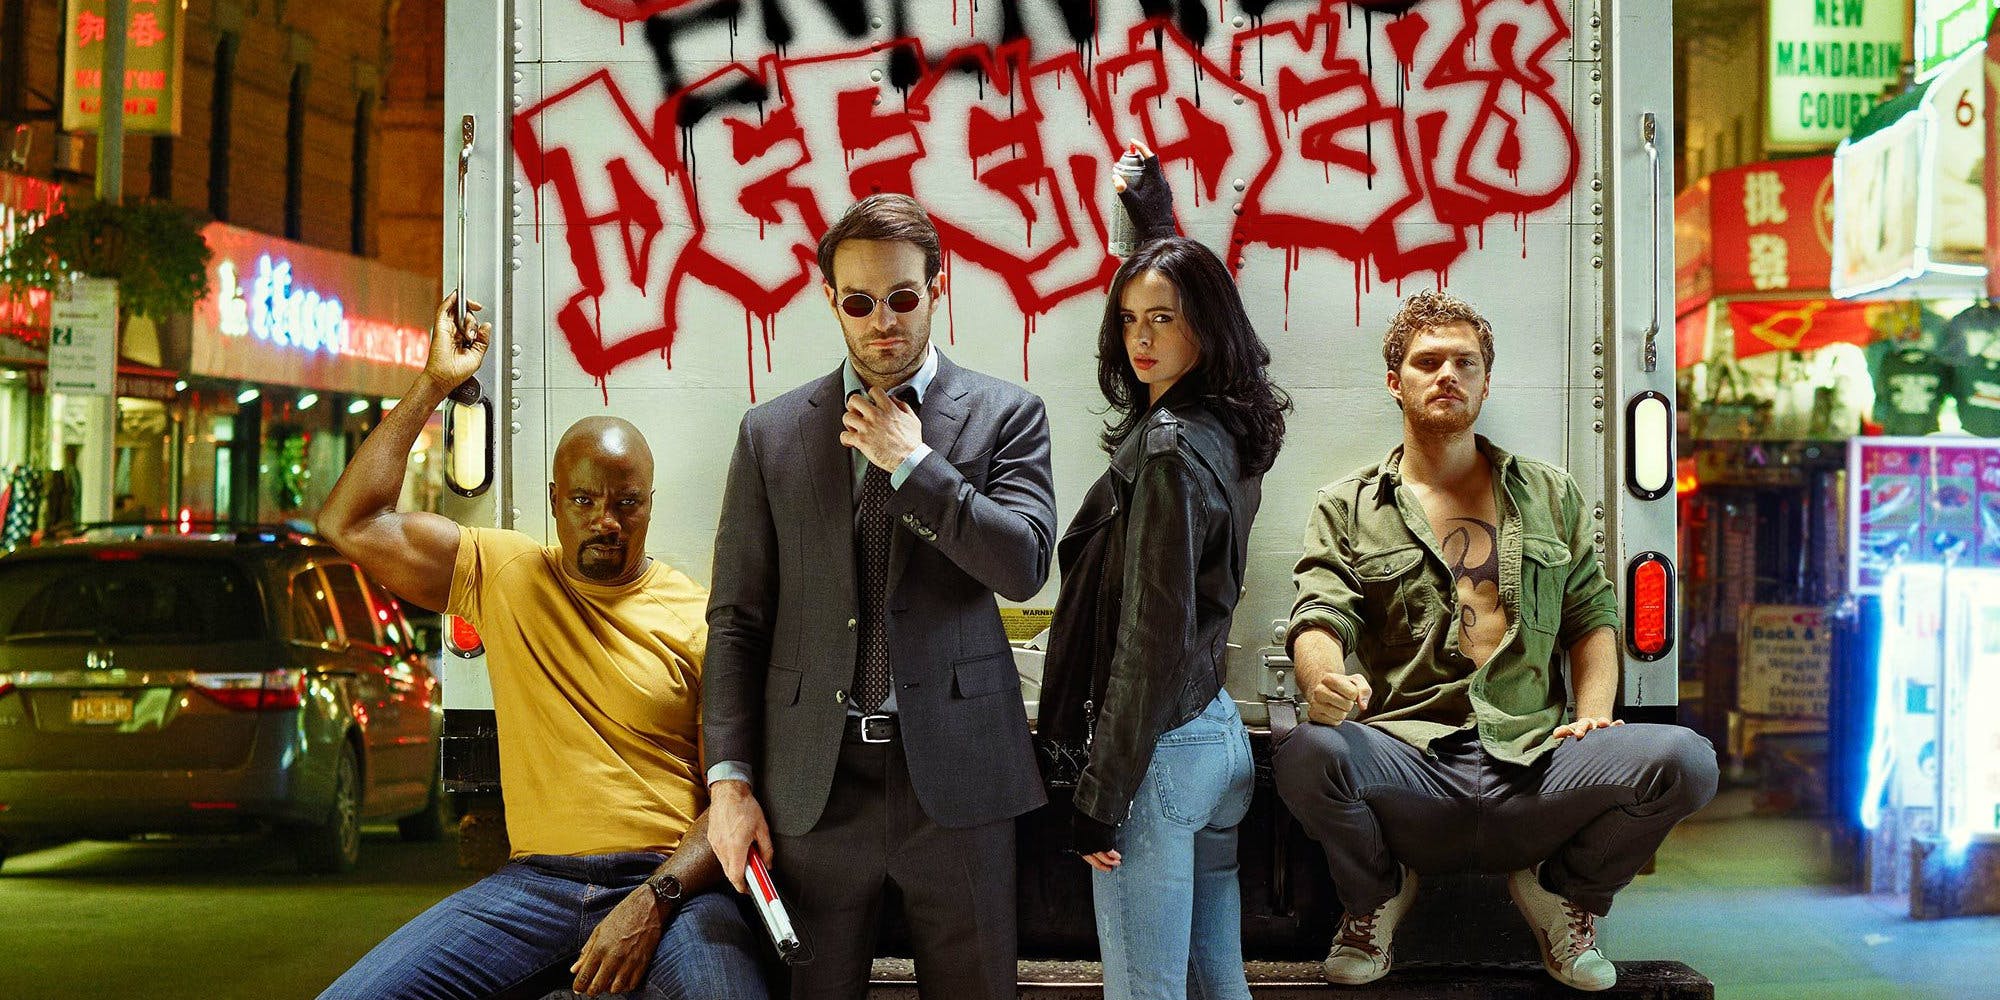 You are reading: 5 Life Lessons and Moral Value from Marvel's The Defenders on Netflix (Featuring Daredevil, Jessica Jones, Luke Cage and Iron Fist).